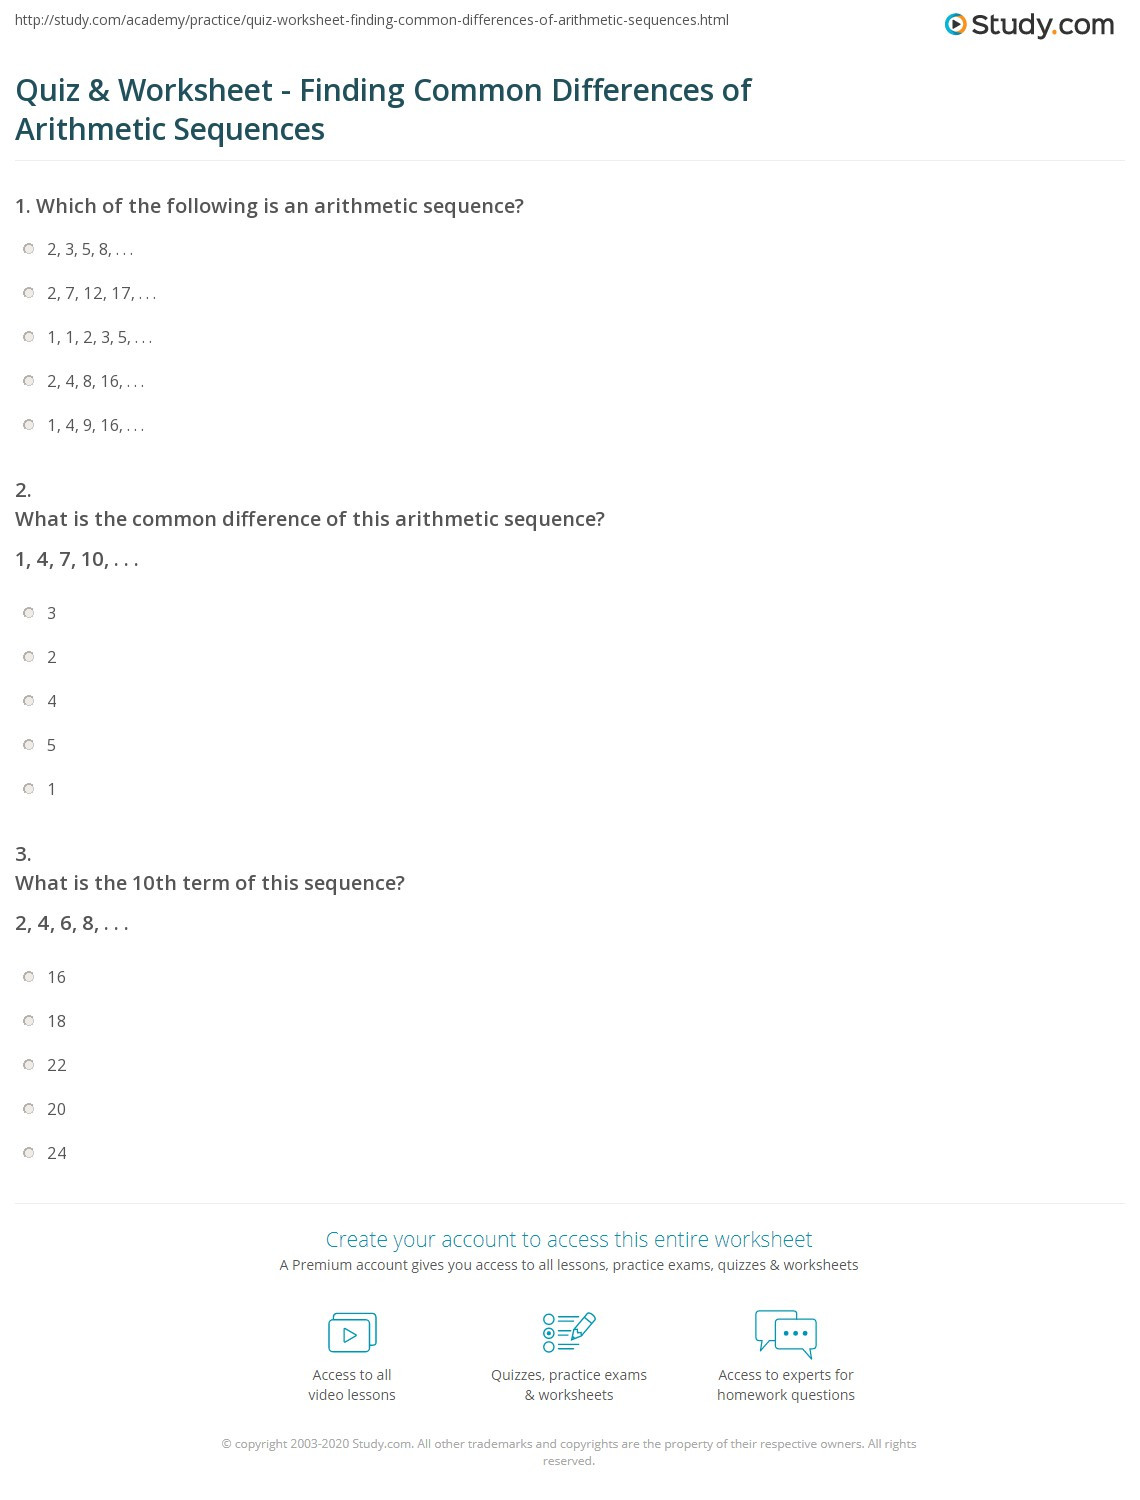 Arithmetic Sequence Worksheet Answers Quiz &amp; Worksheet Finding Mon Differences Of Arithmetic